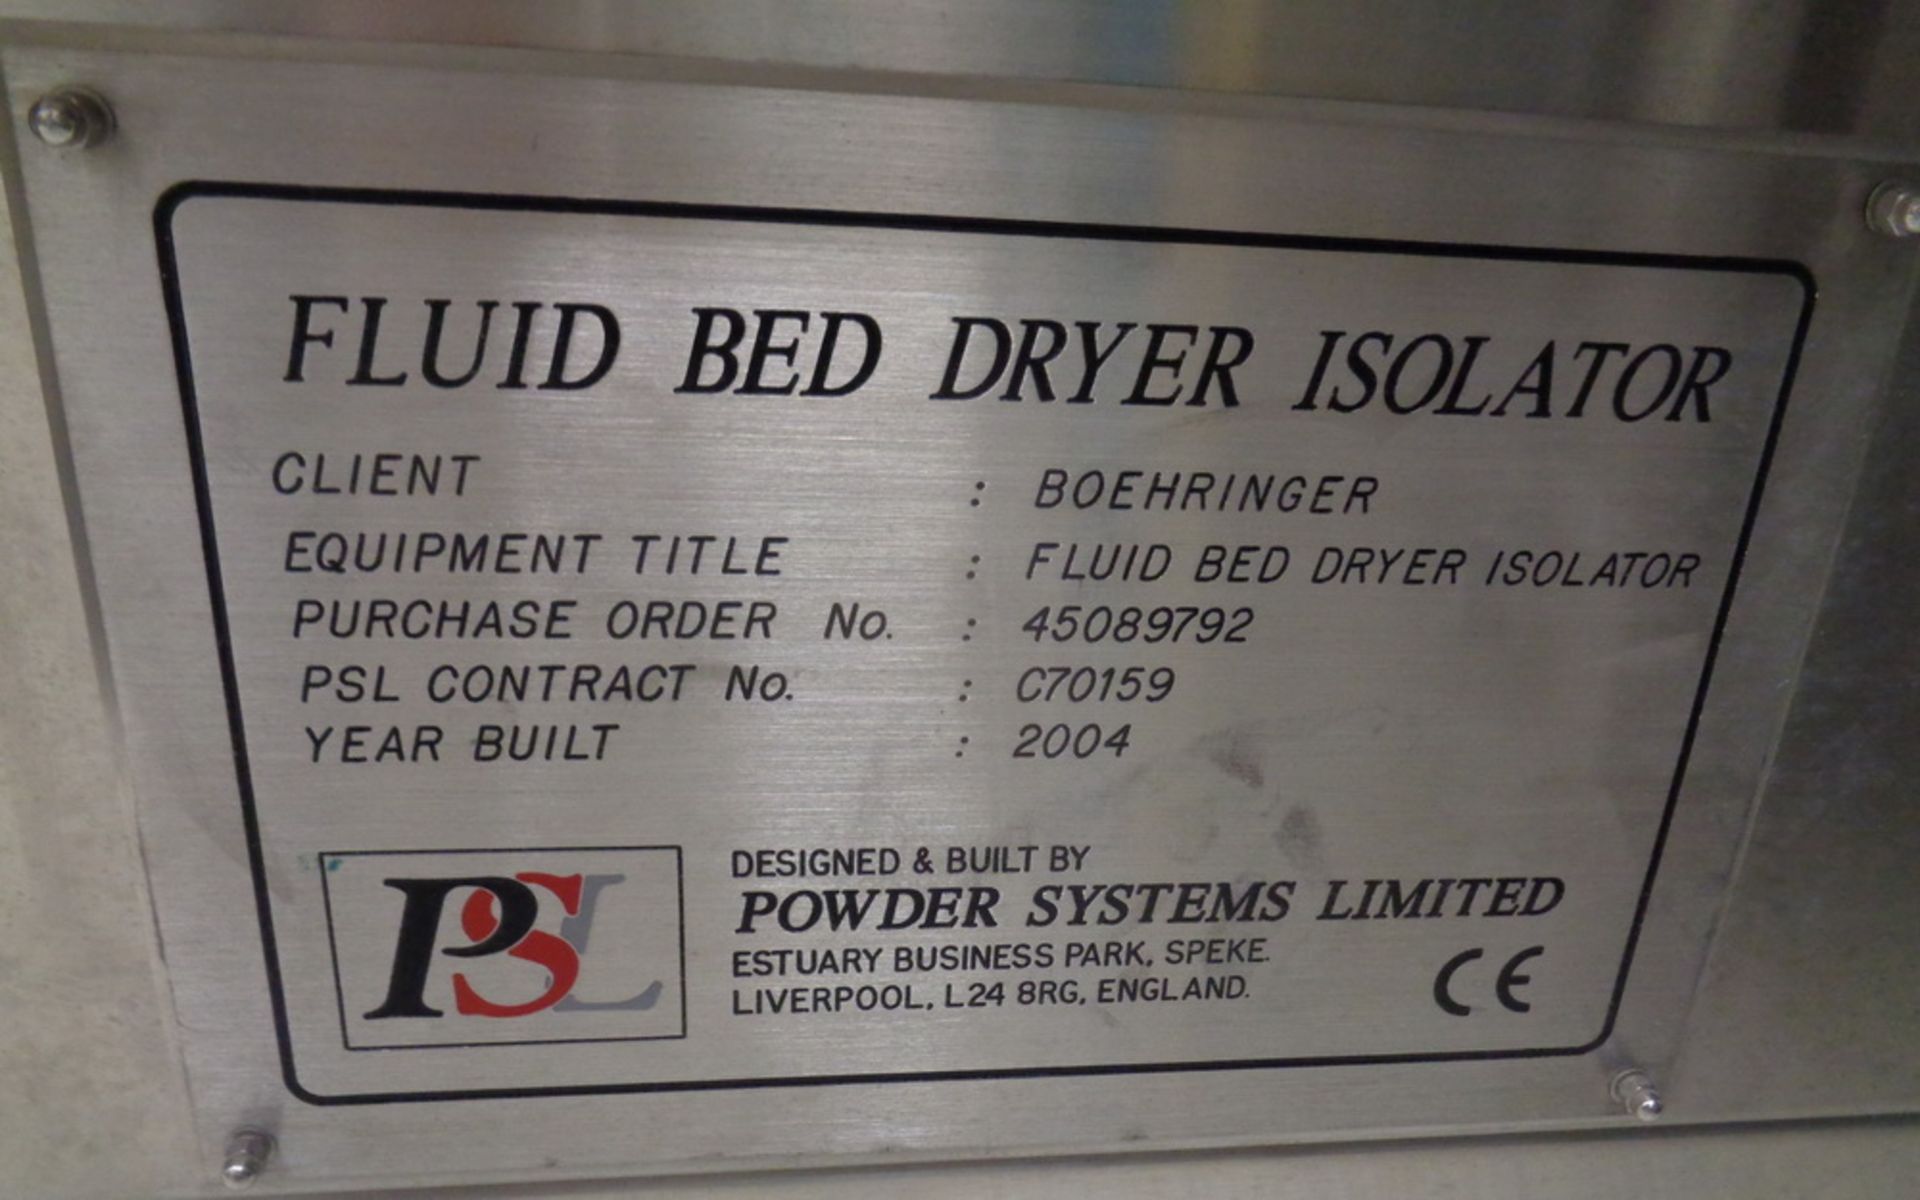 Powder Systems Limited (PSL) Stainless Steel Isolator - Image 13 of 15